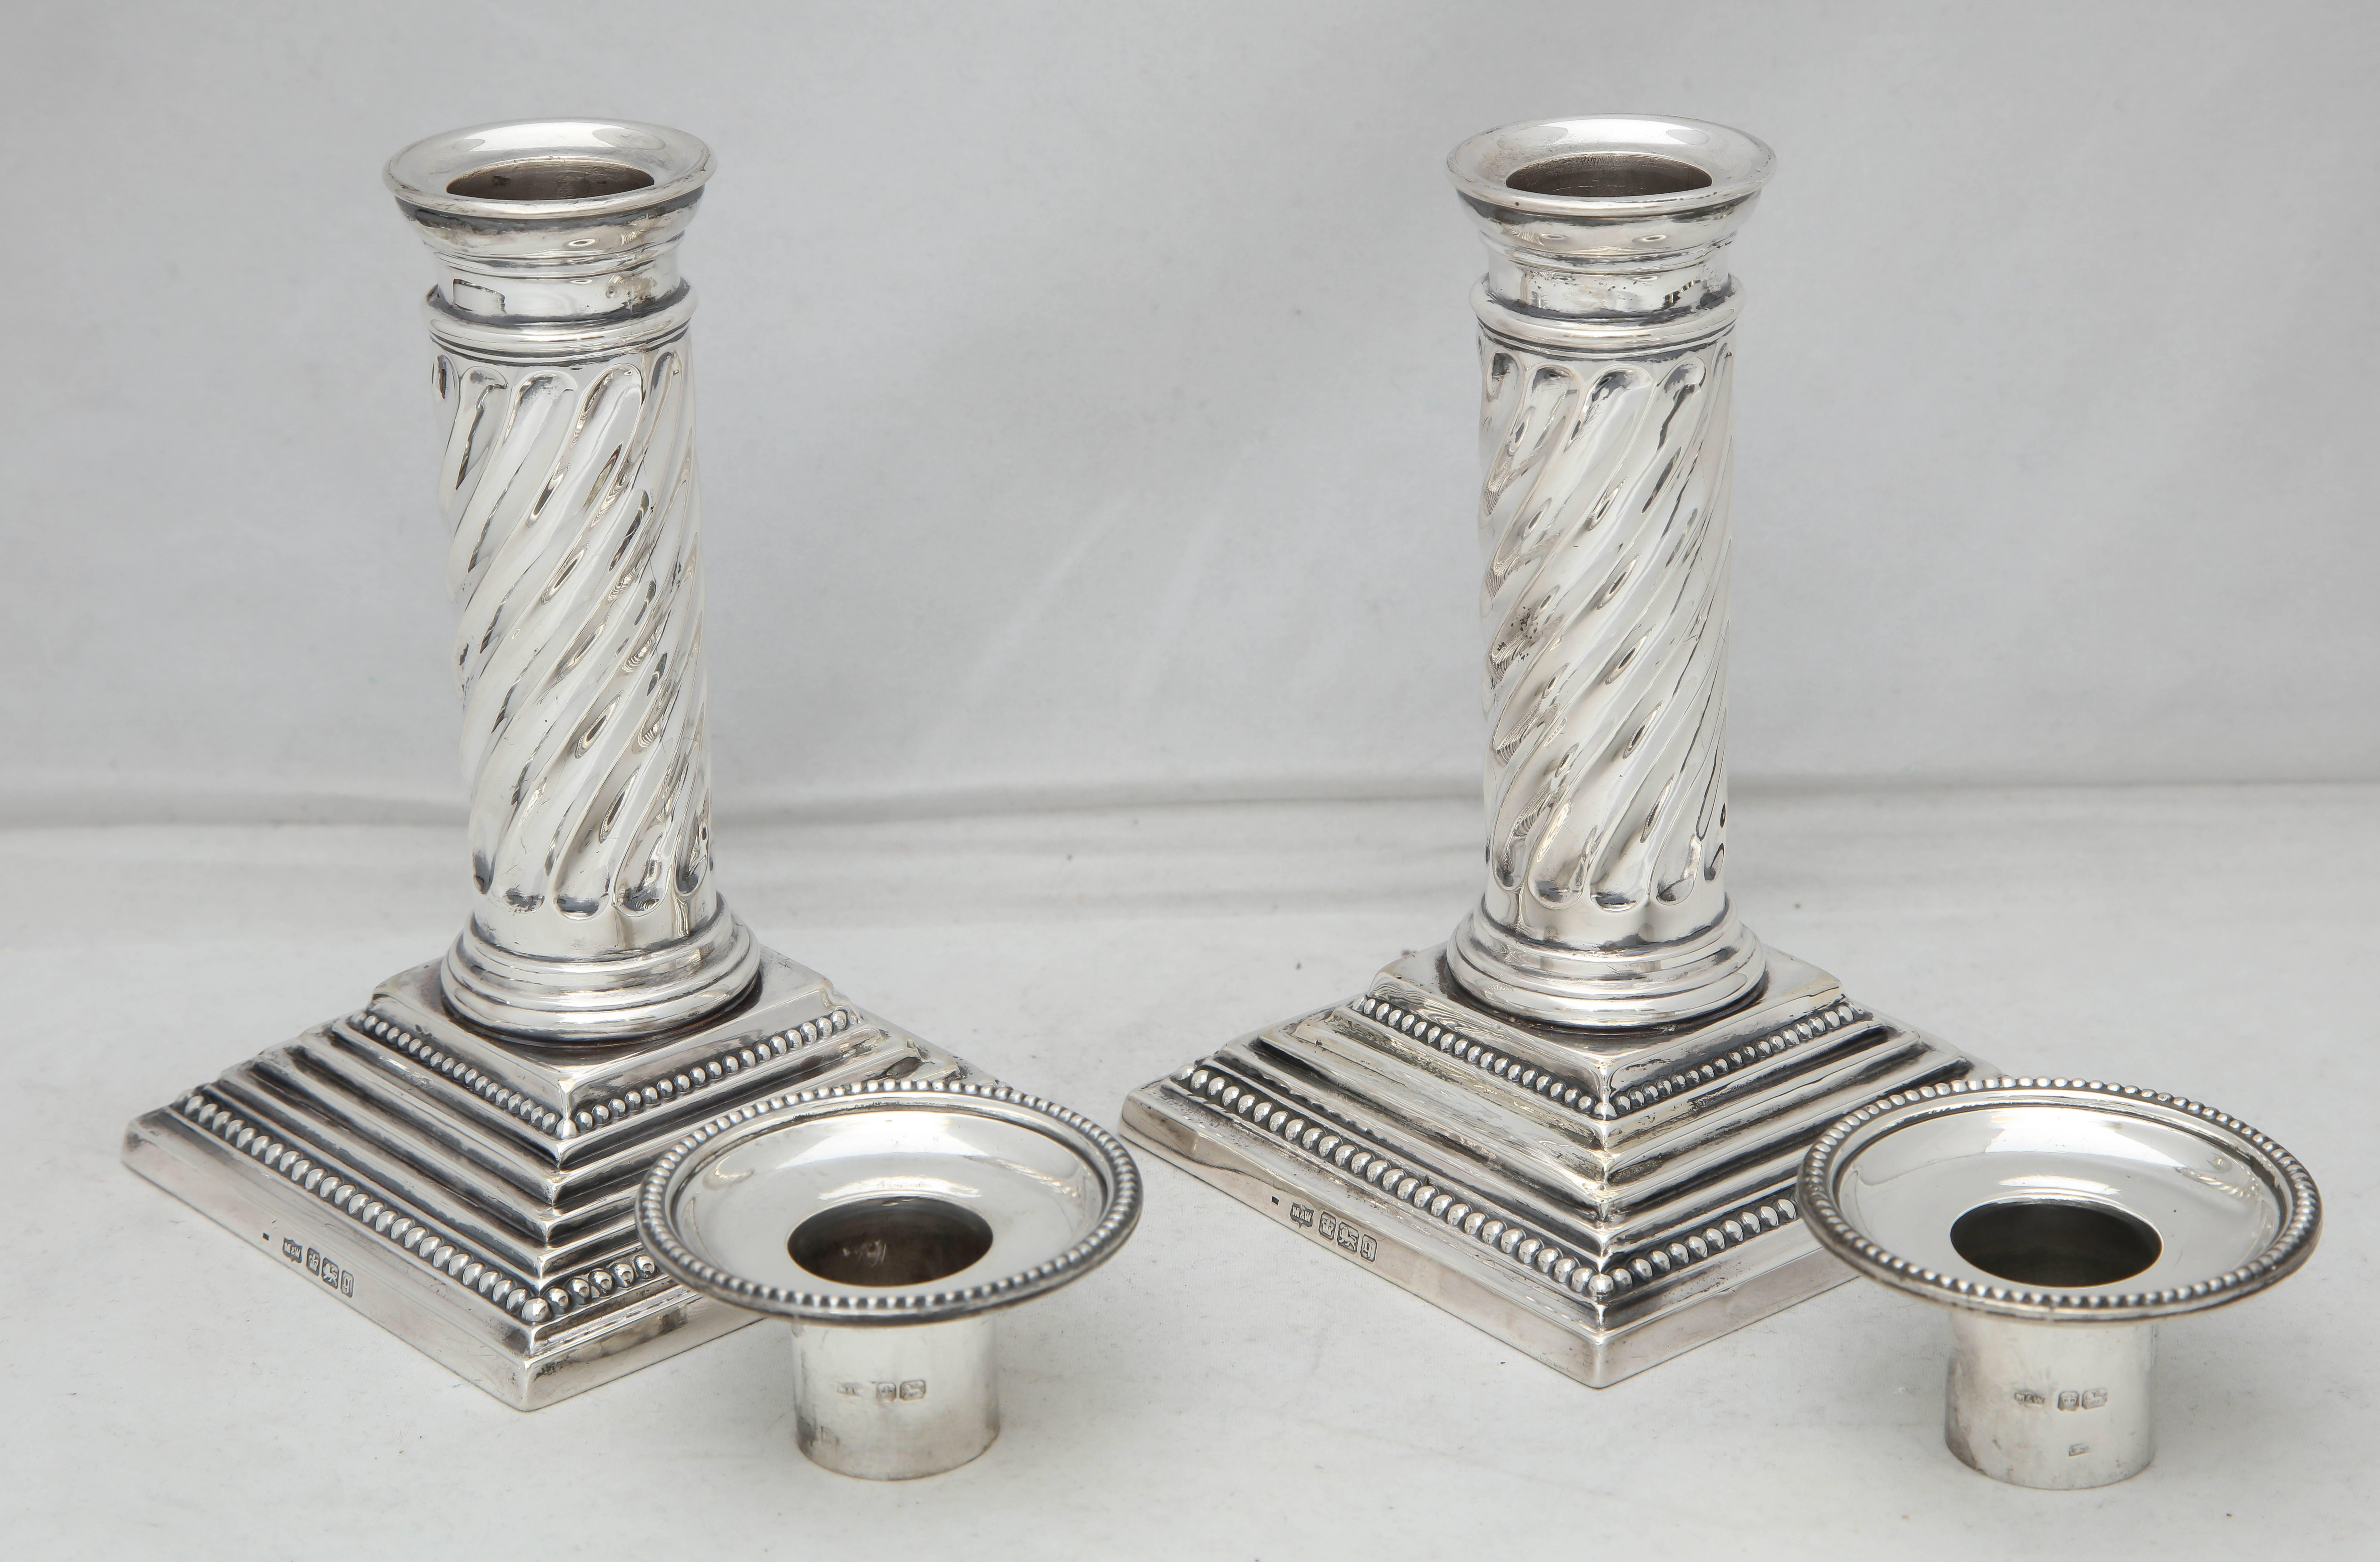 Early 20th Century Pair of Edwardian Neoclassical Sterling Silver Column-Form Candlesticks